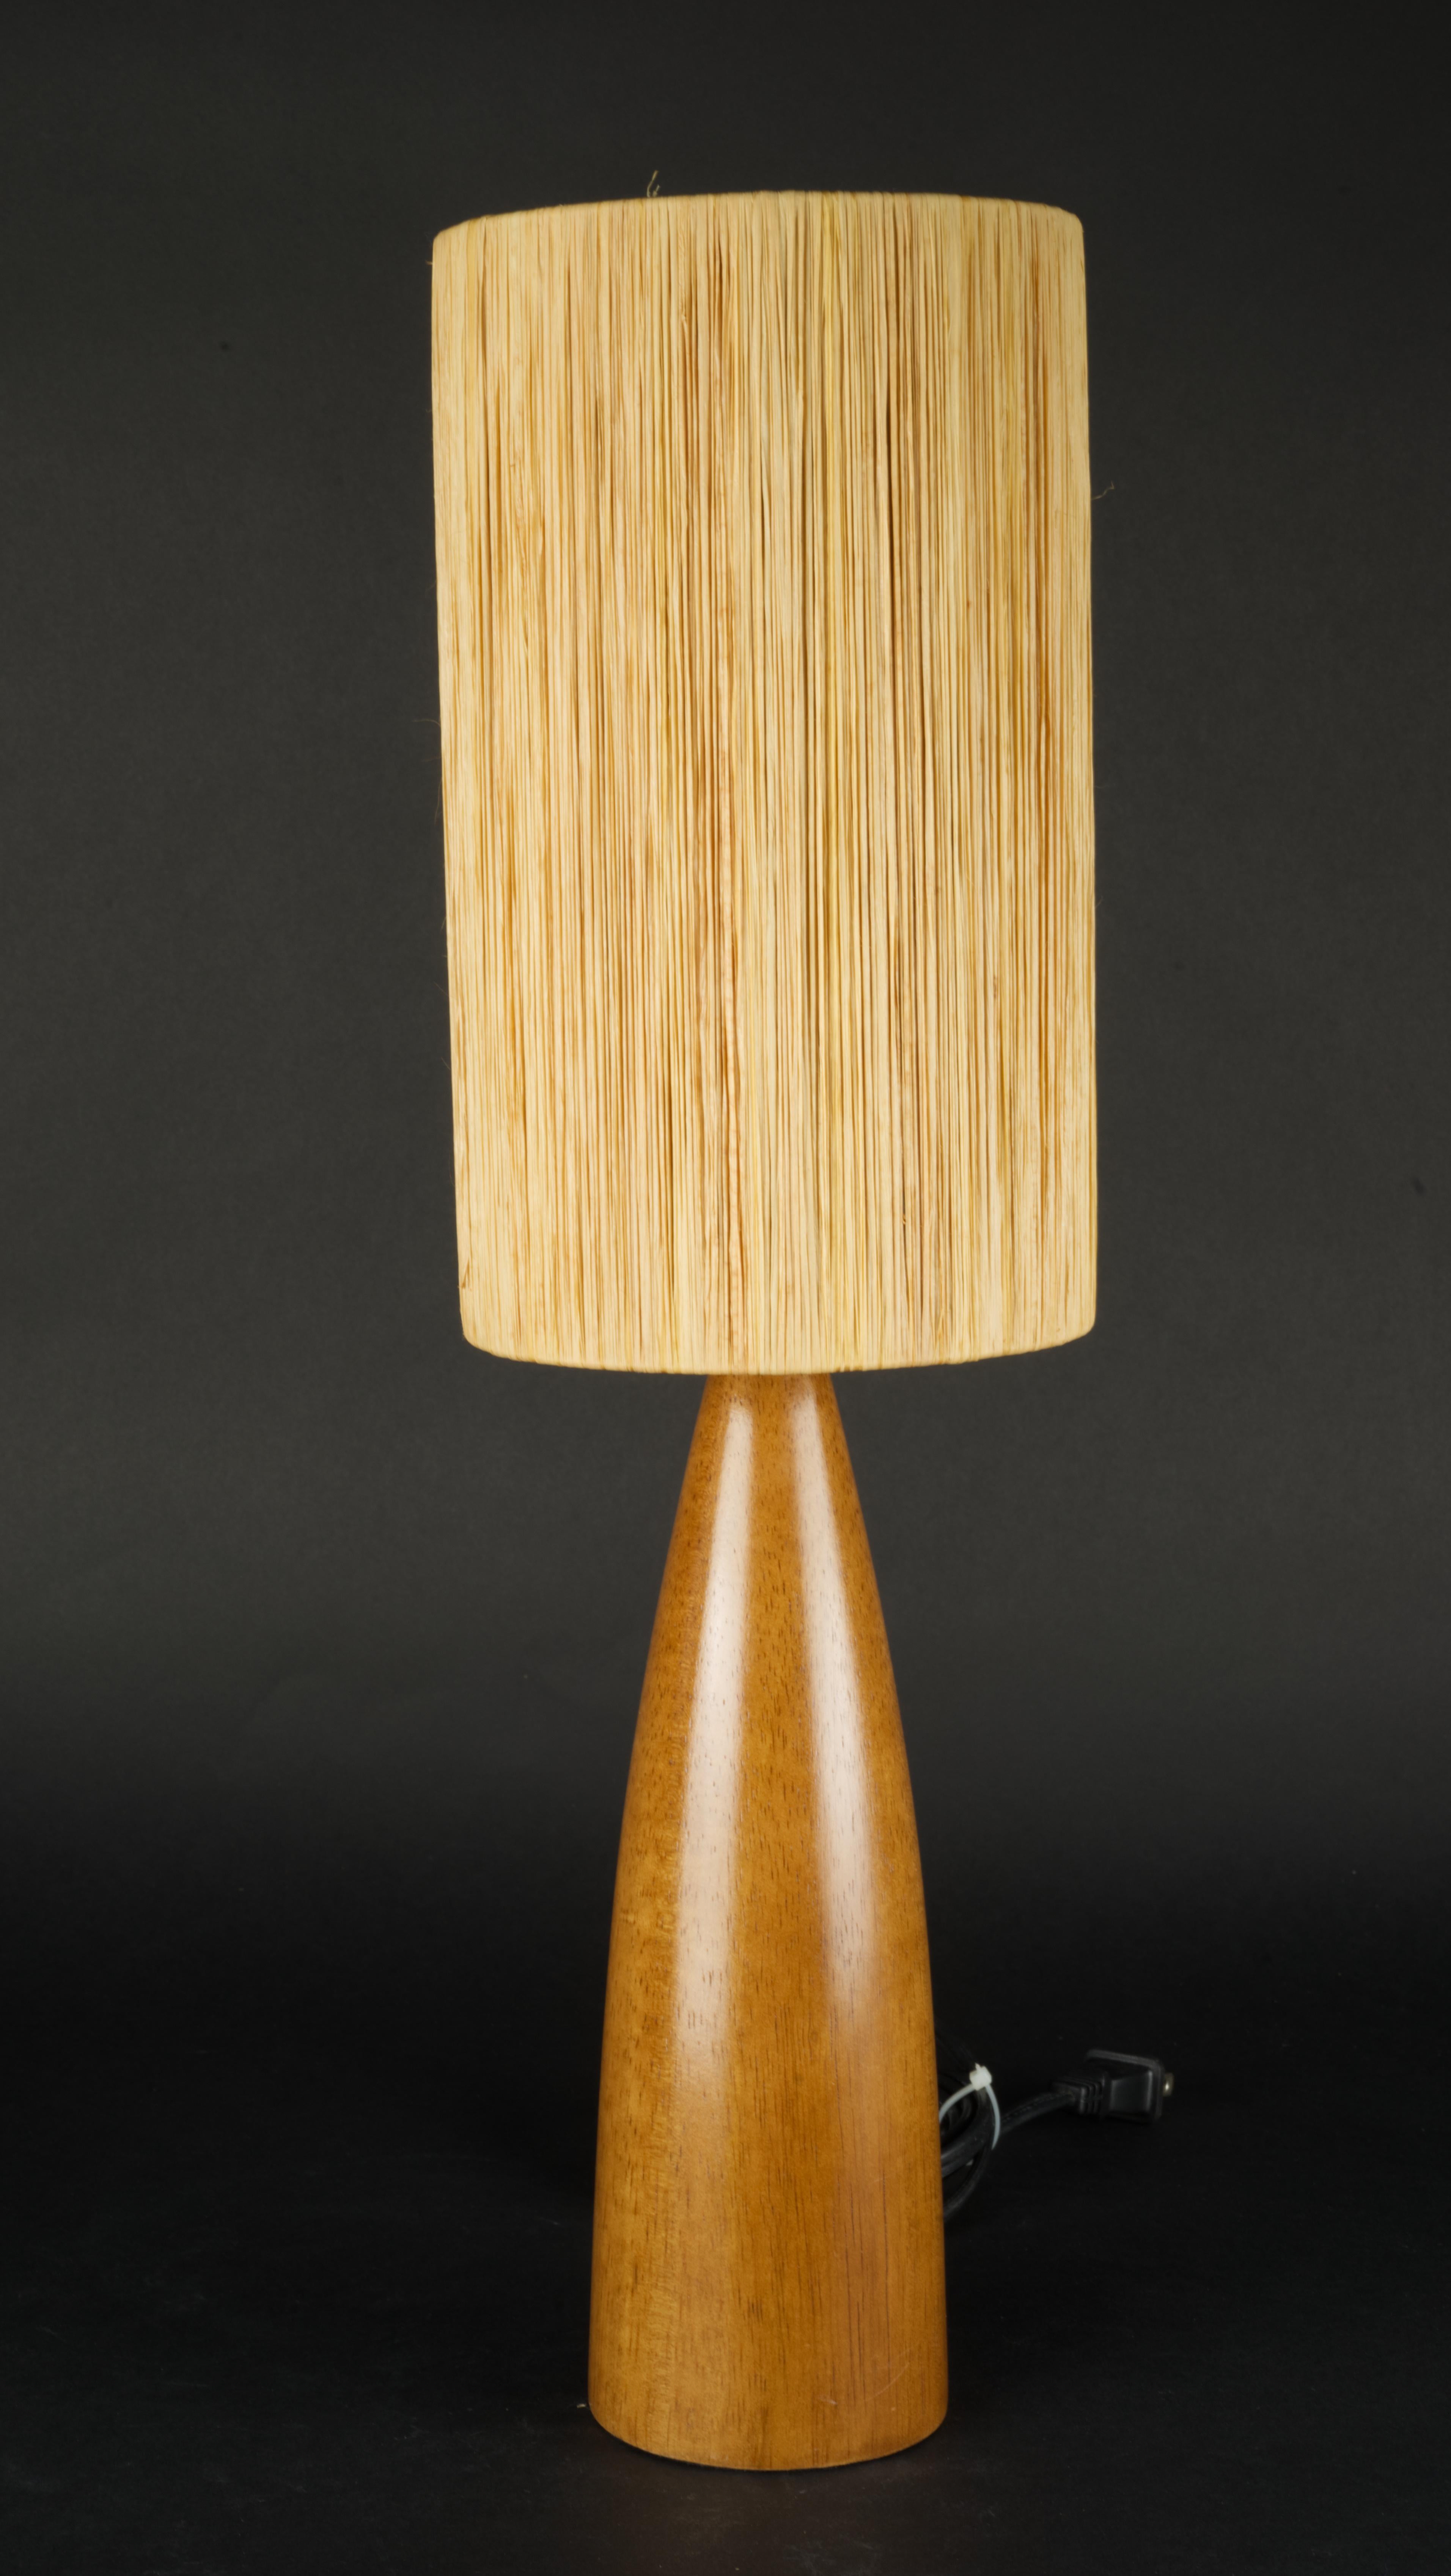 20th Century Scandinavian Modern Teak Accent Table Lamp with Original Straw Shade, Mid Centur For Sale